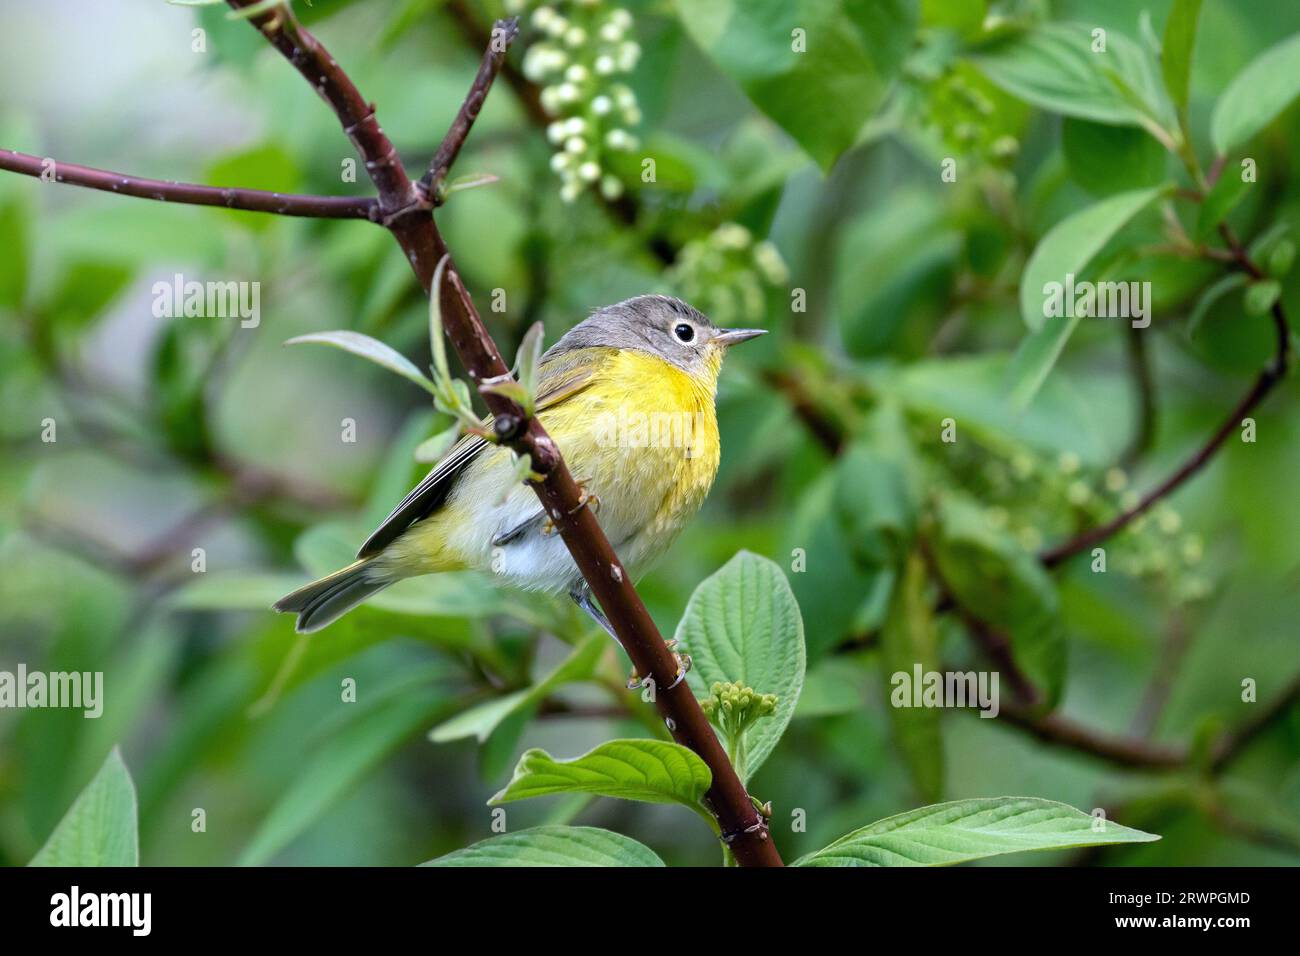 Closeup of Nashville Warbler perching on a leafy branch during spring migration, Ontario, Canada Stock Photo